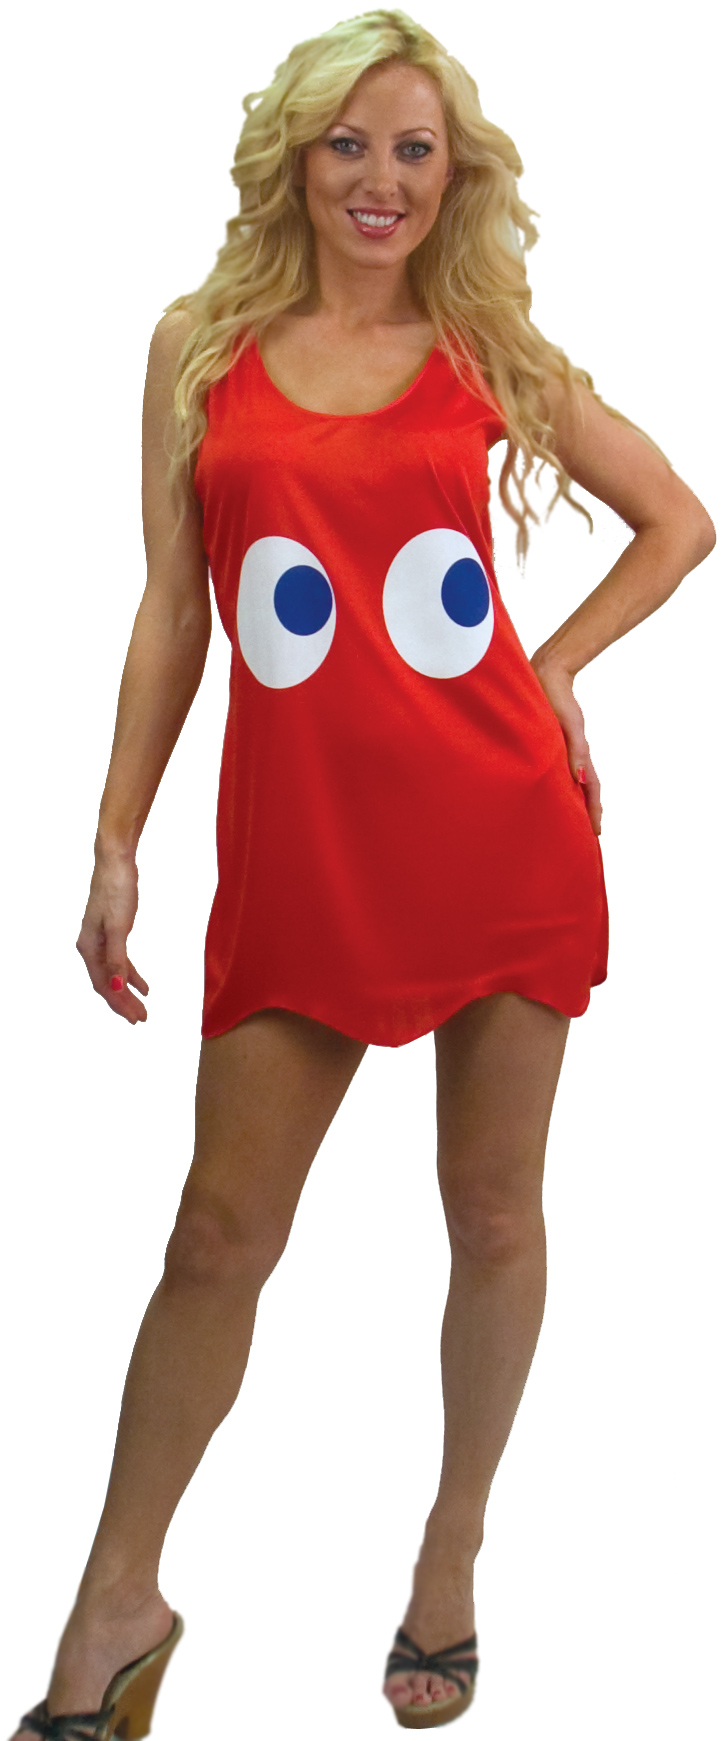 InCogneato Women's Pac-Man Blinky Deluxe Tank Dress Adult Costume - Red - Standard (One Size)